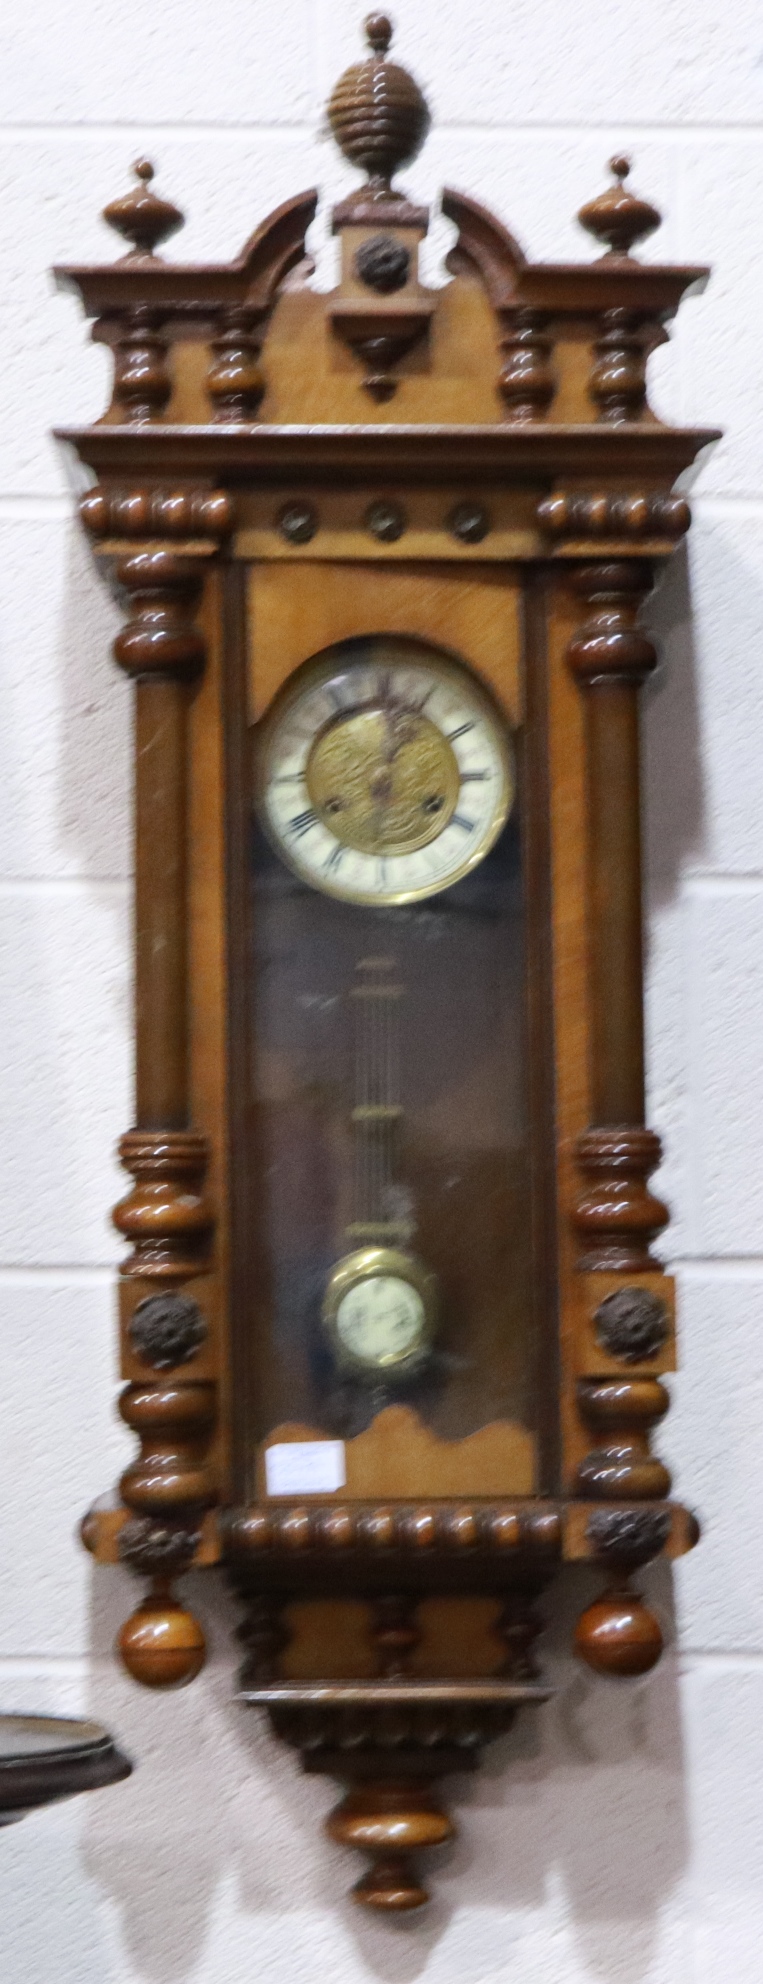 19th century walnut cased Vienna wall clock with pendulum display door, H: 105 cm. Not available for